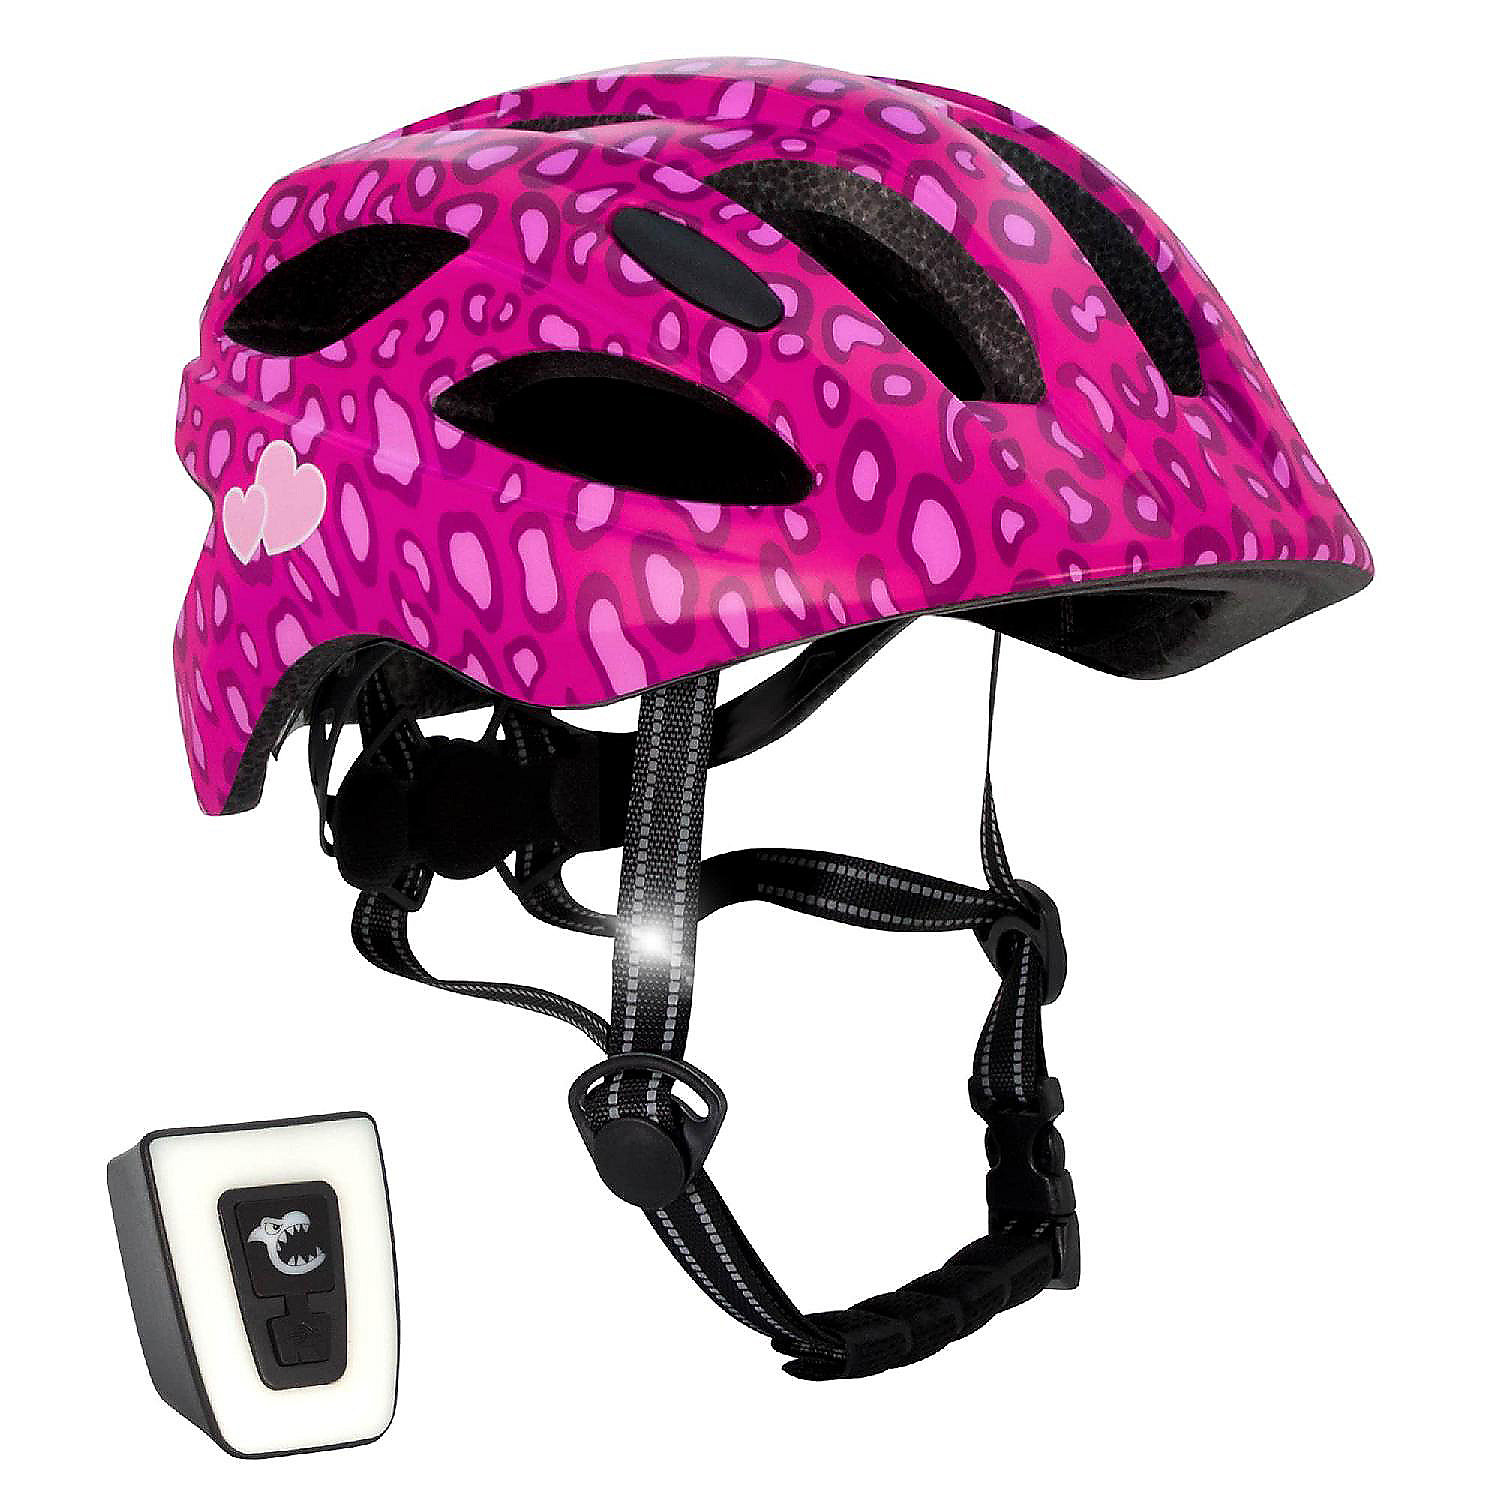 vlotter Afrika Ten einde raad Crazy Safety - Bicycle Helmet for kids age 6-12 years - Headsize 21-23  inches - Pink Spots - CPSC Certified | Oriental Trading